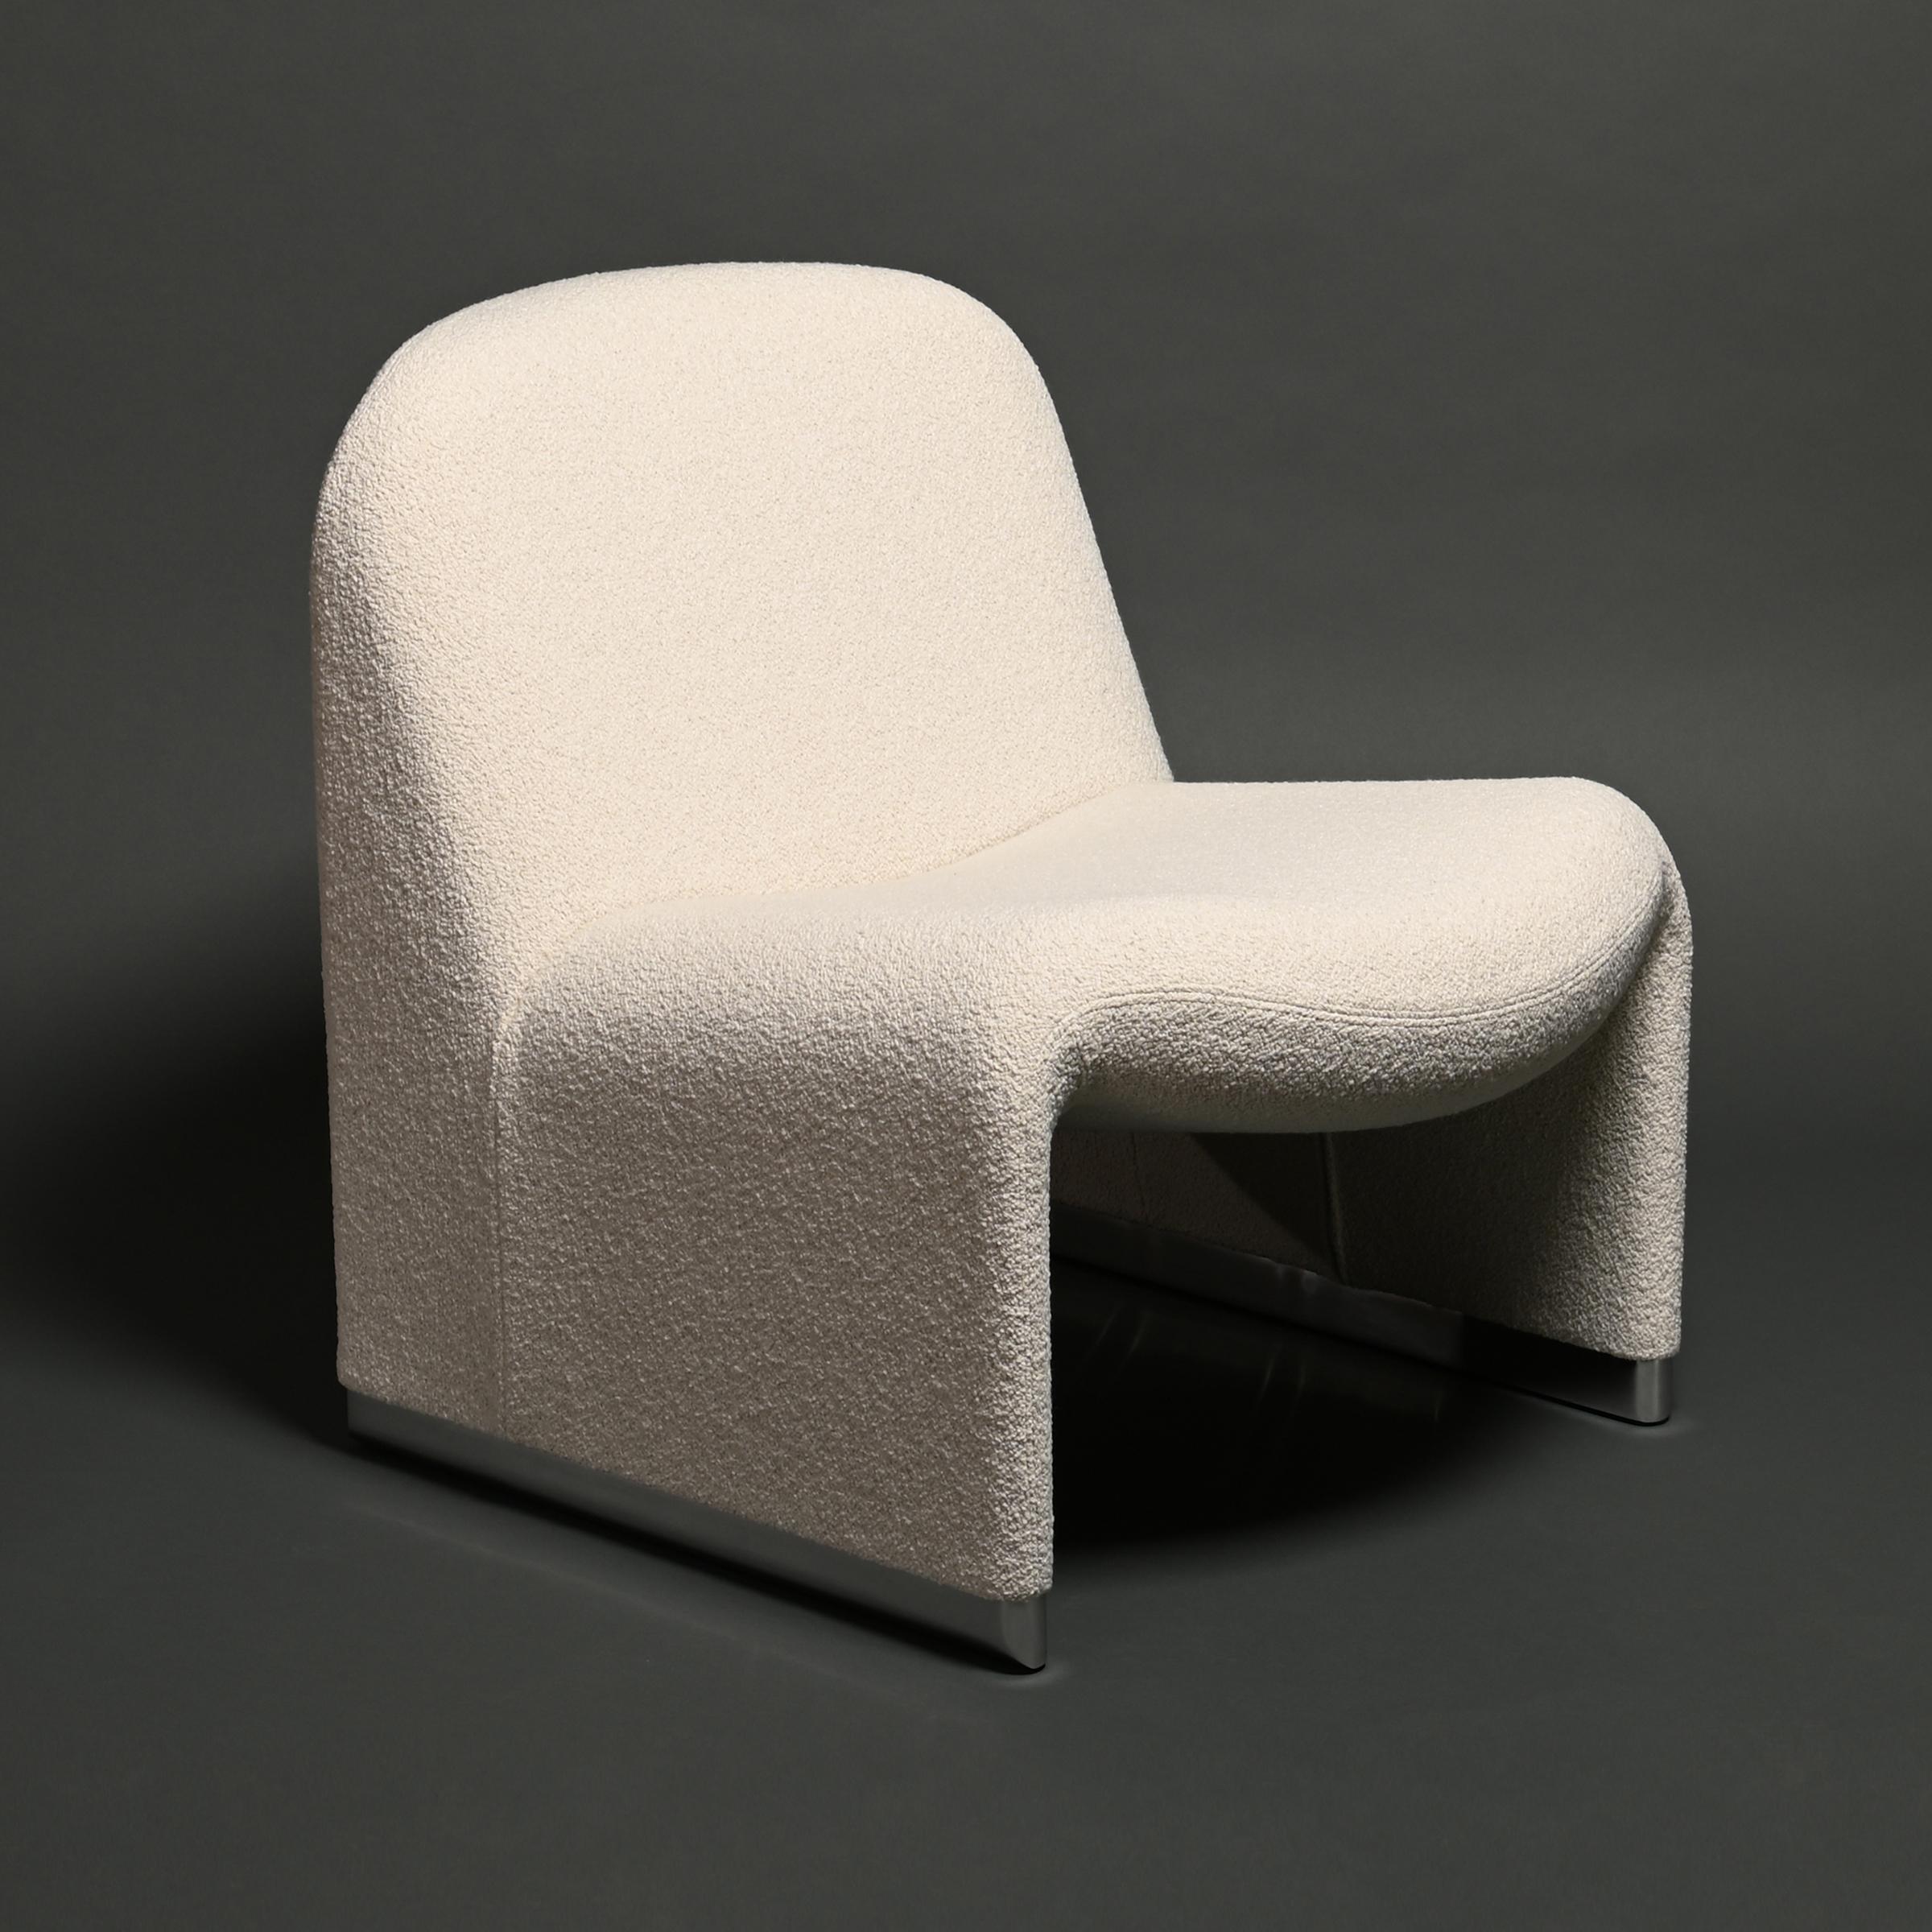 Giancarlo Piretti Alky Lounge Chair in White Bouclé Fabric for Anonima Castelli In Excellent Condition For Sale In Amsterdam, NL